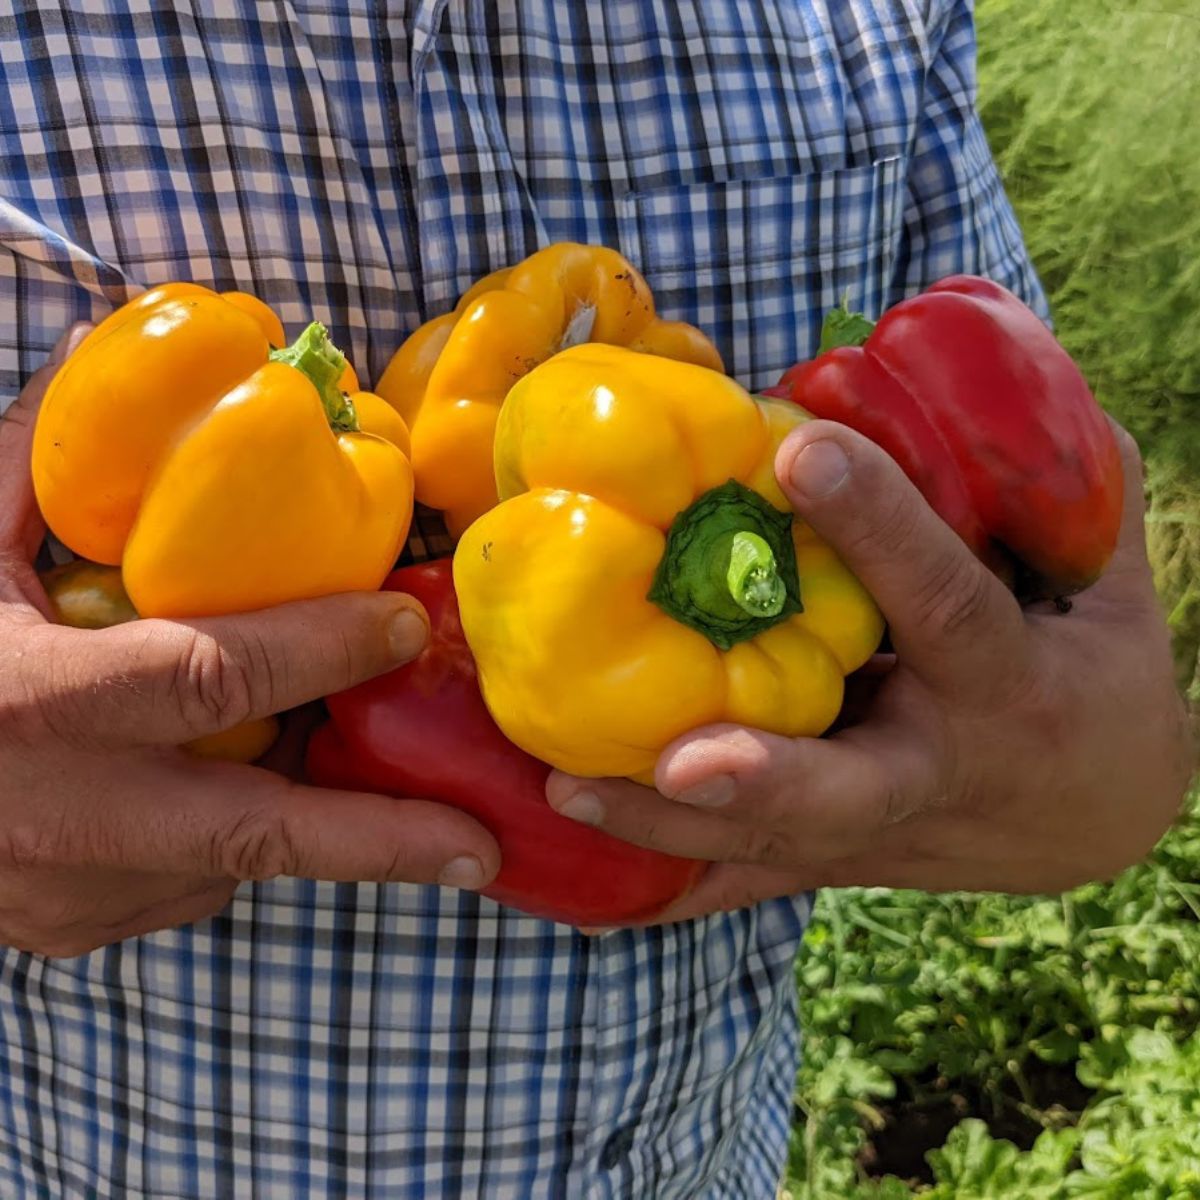 My husband holding an armful of colorful, red and yellow peppers.